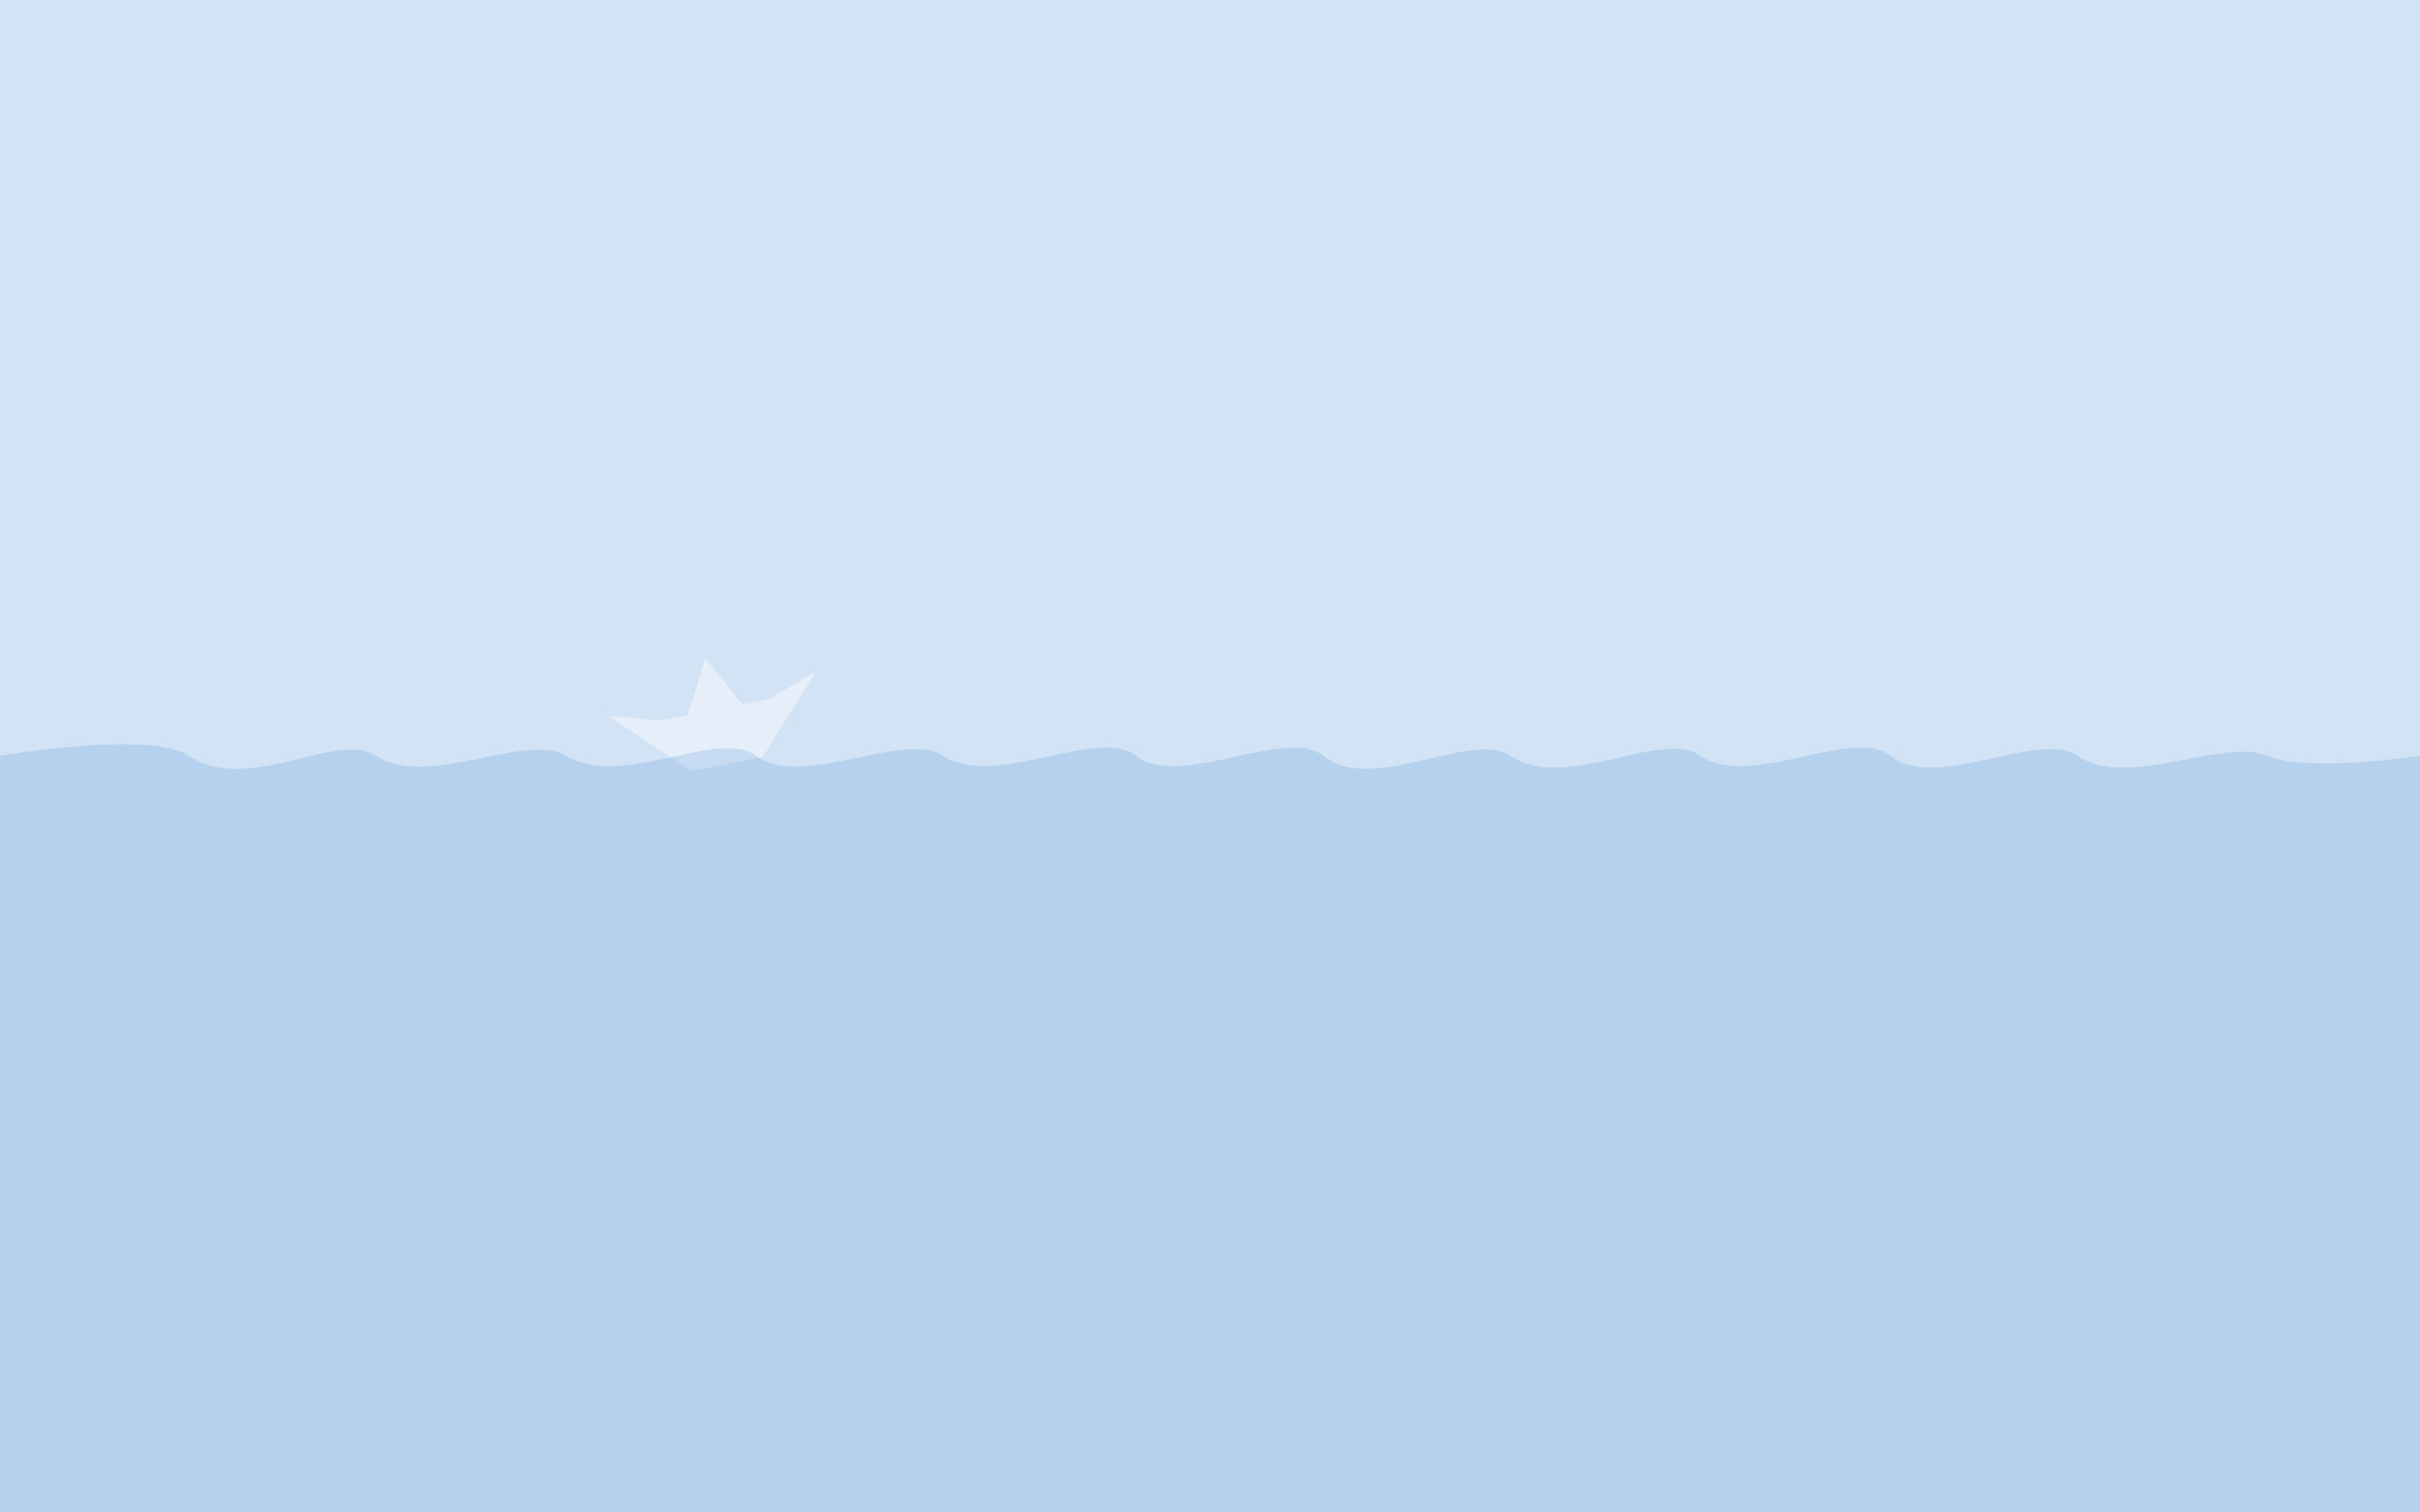 A boat is sailing on the ocean - Pastel minimalist